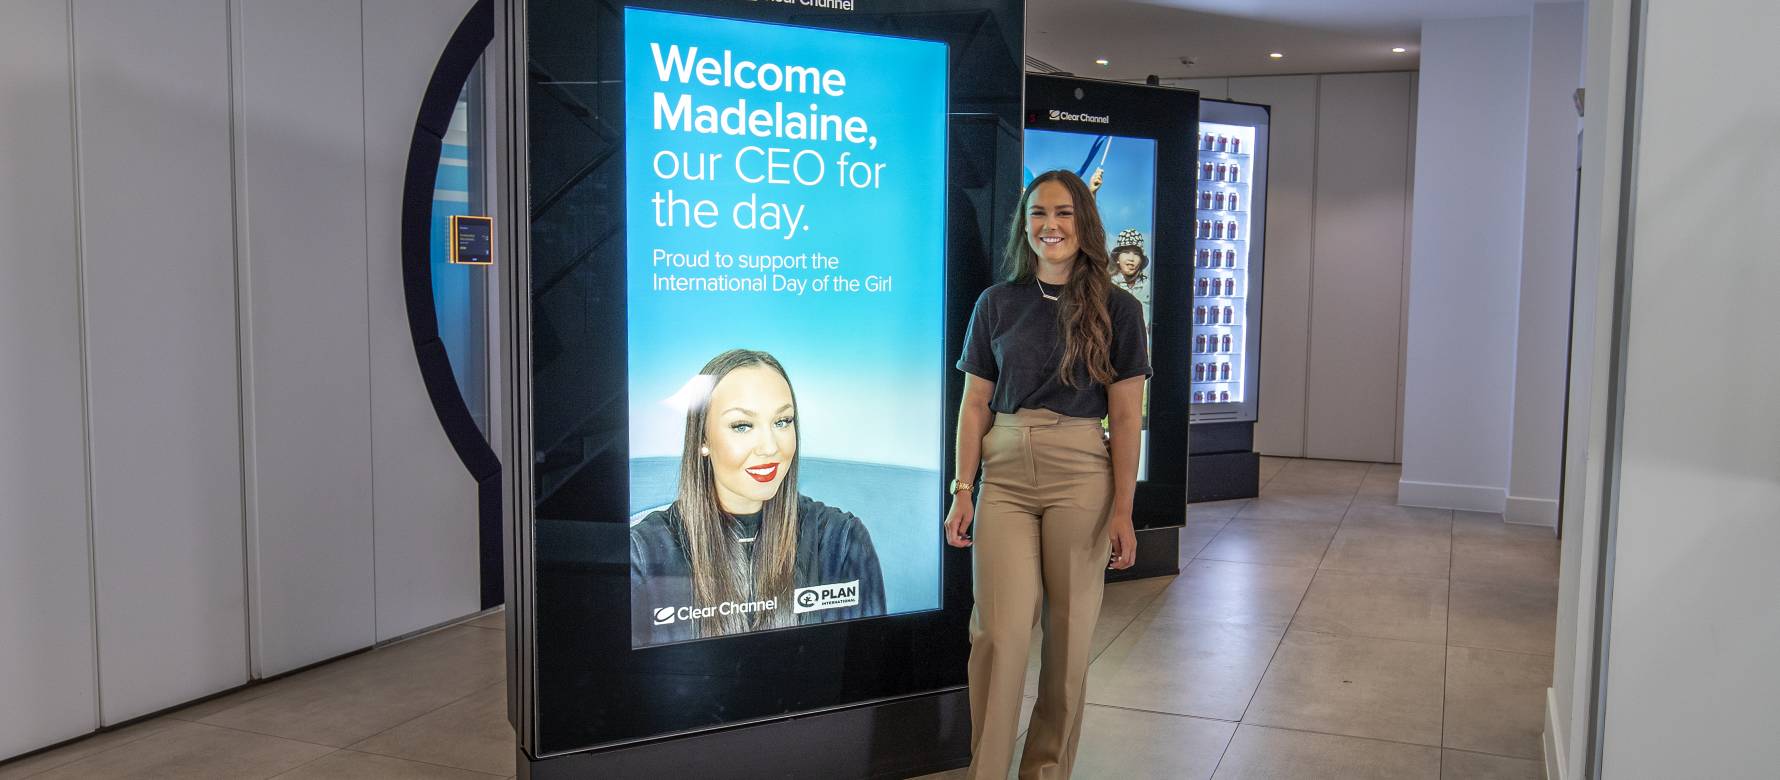 Madelaine in the reception of Clear Channels Golden Square office standing next to a digital display, that says welcome I'll see you home for the day, proud to support the International Day of the girl